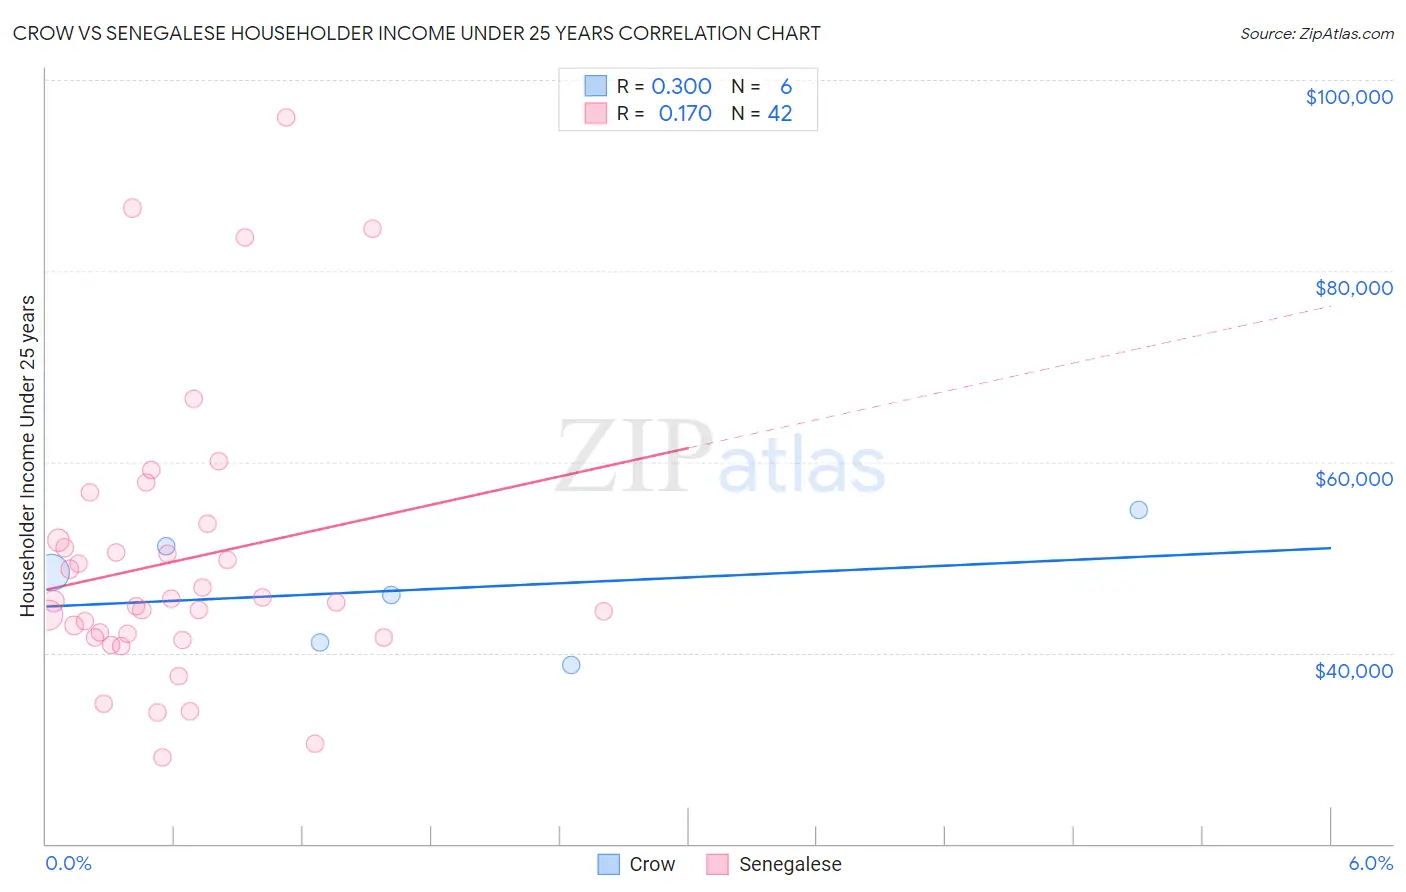 Crow vs Senegalese Householder Income Under 25 years